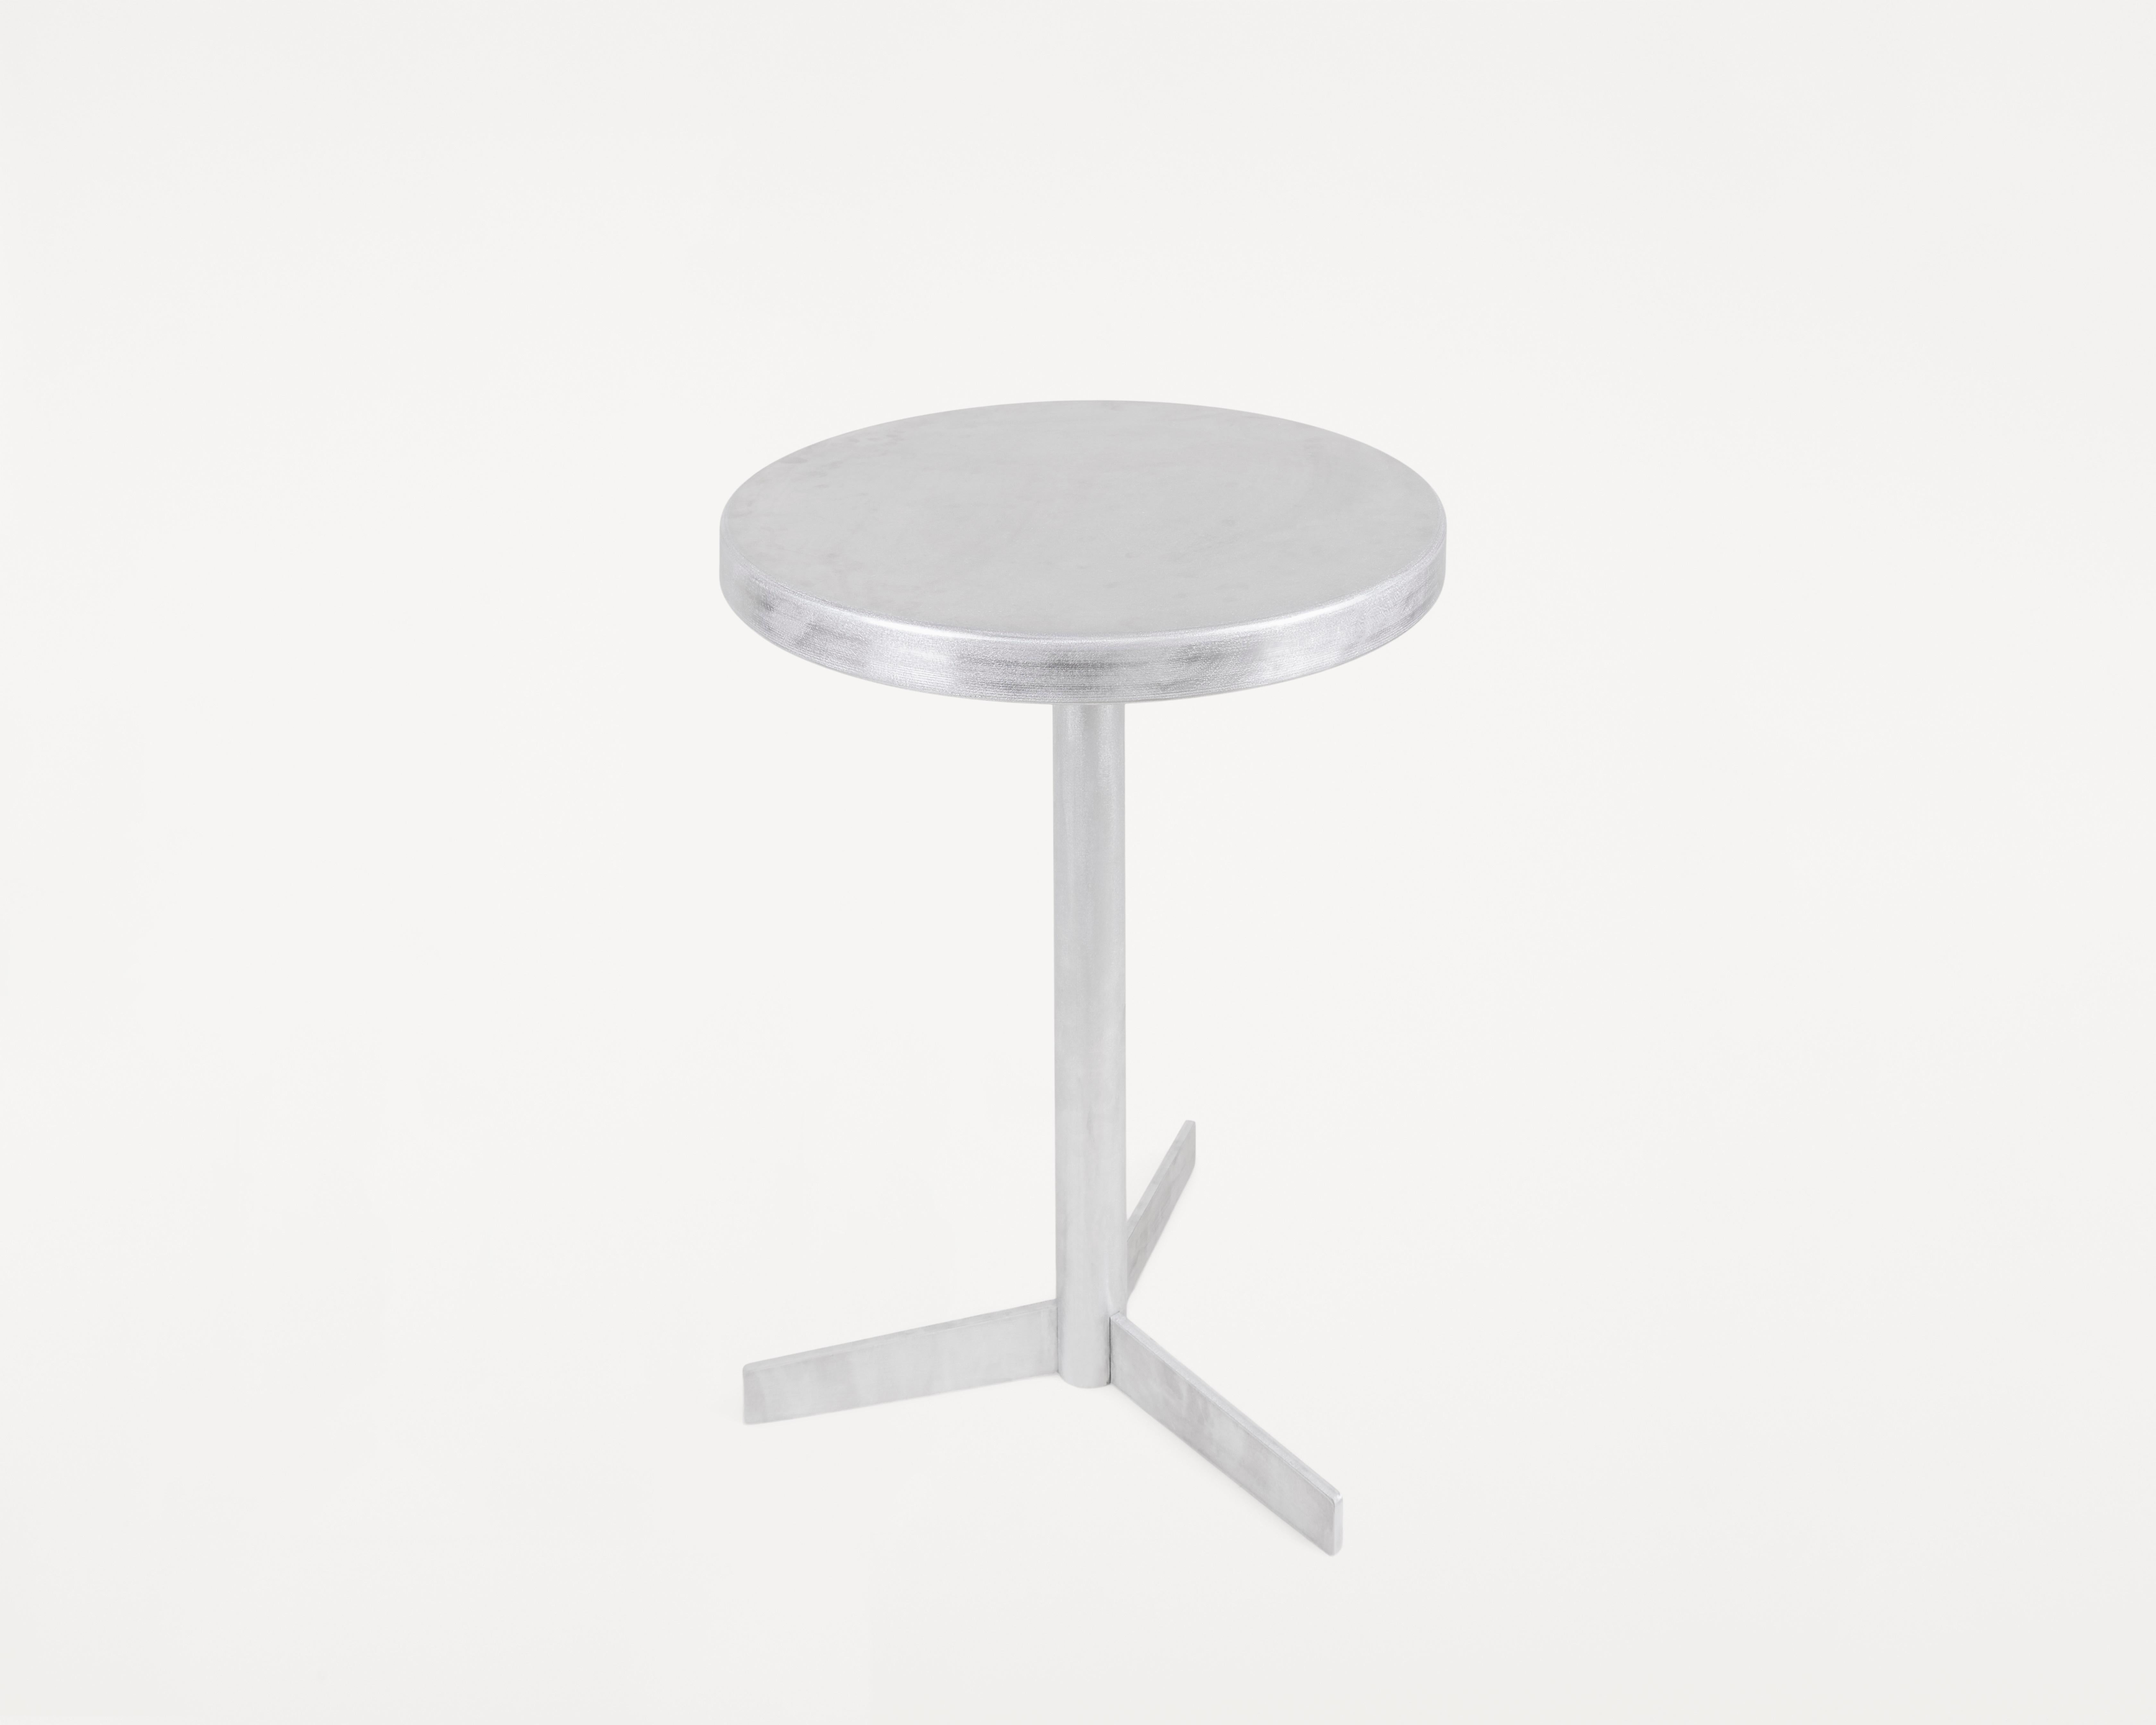 Brushed Industrial Tasca Table Small For Sale